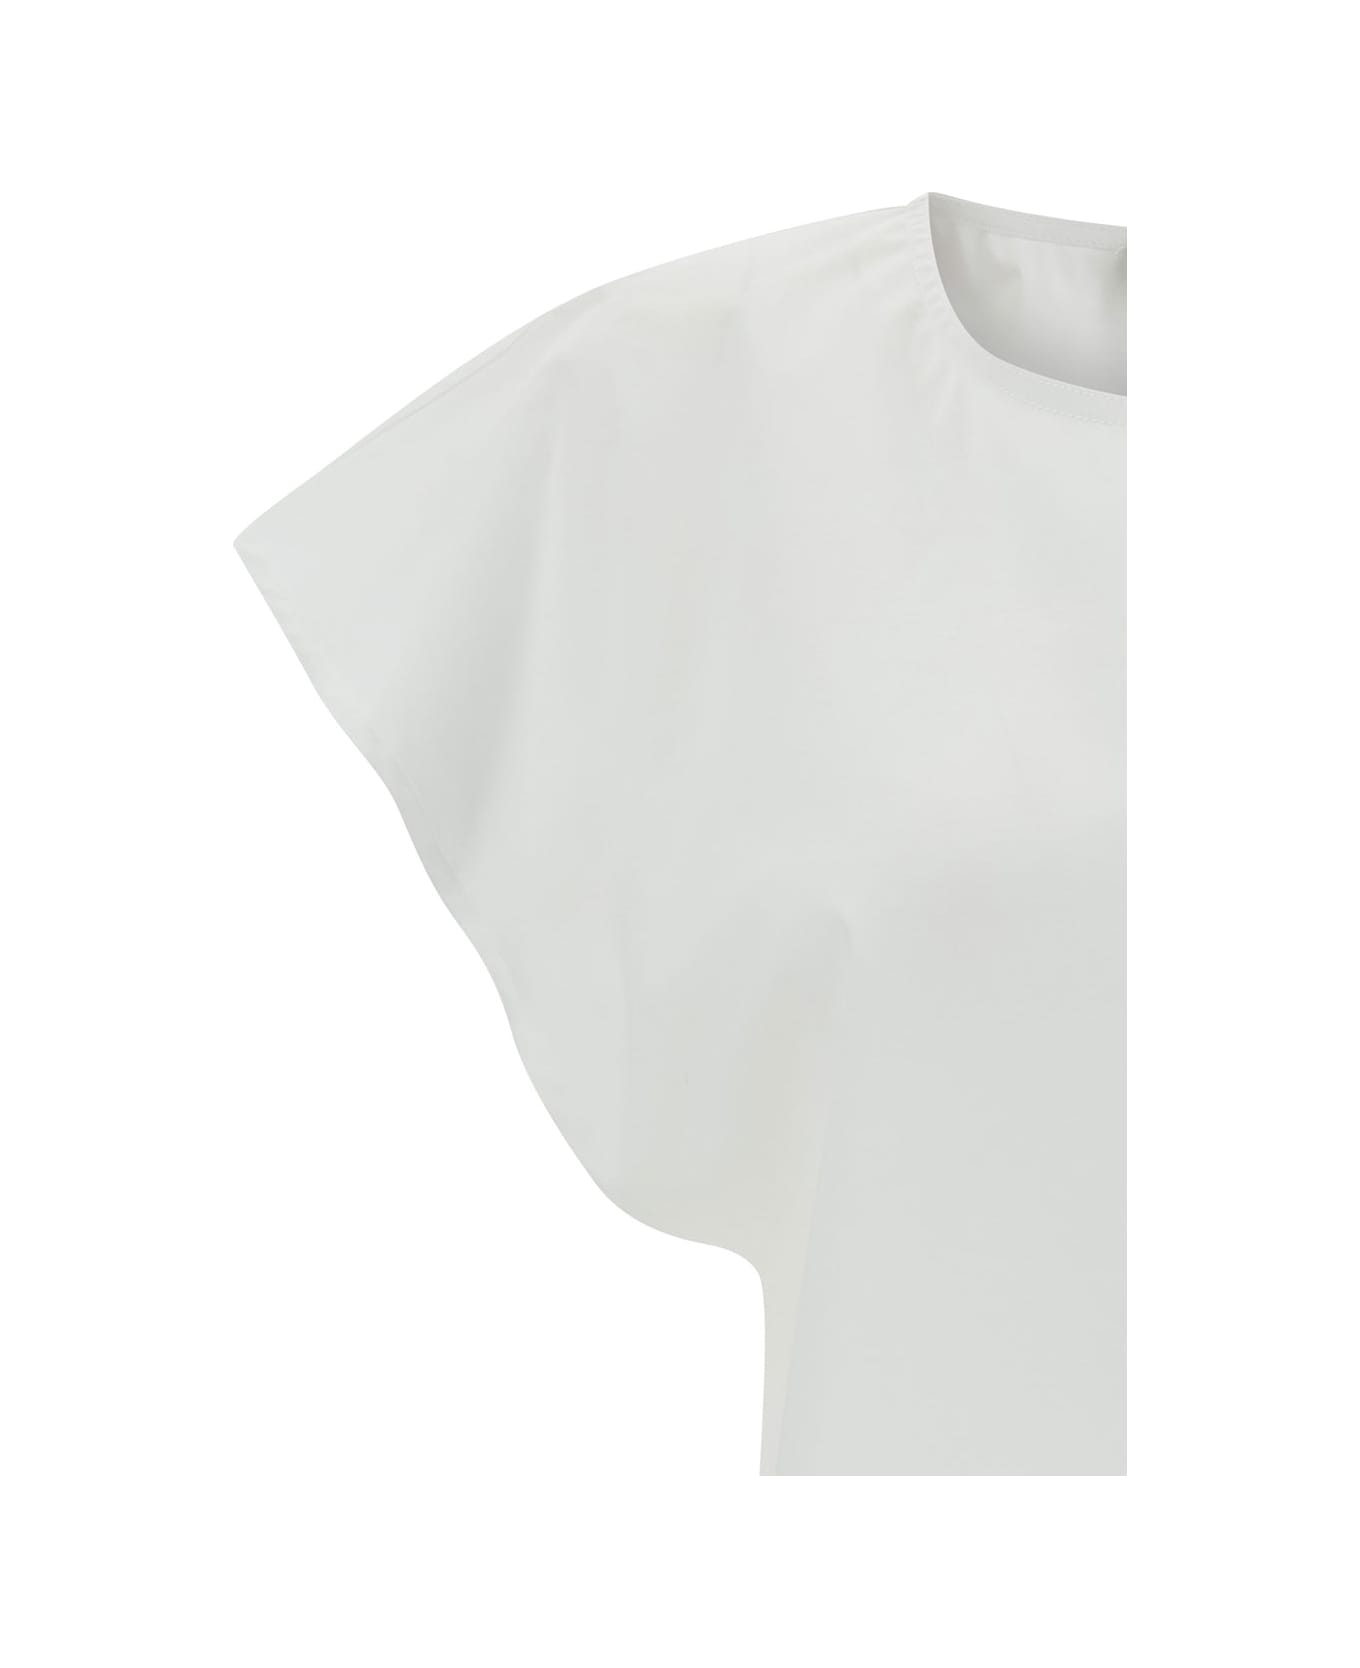 Federica Tosi White Top With Cap Sleeves In Stretch Cotton Woman - White